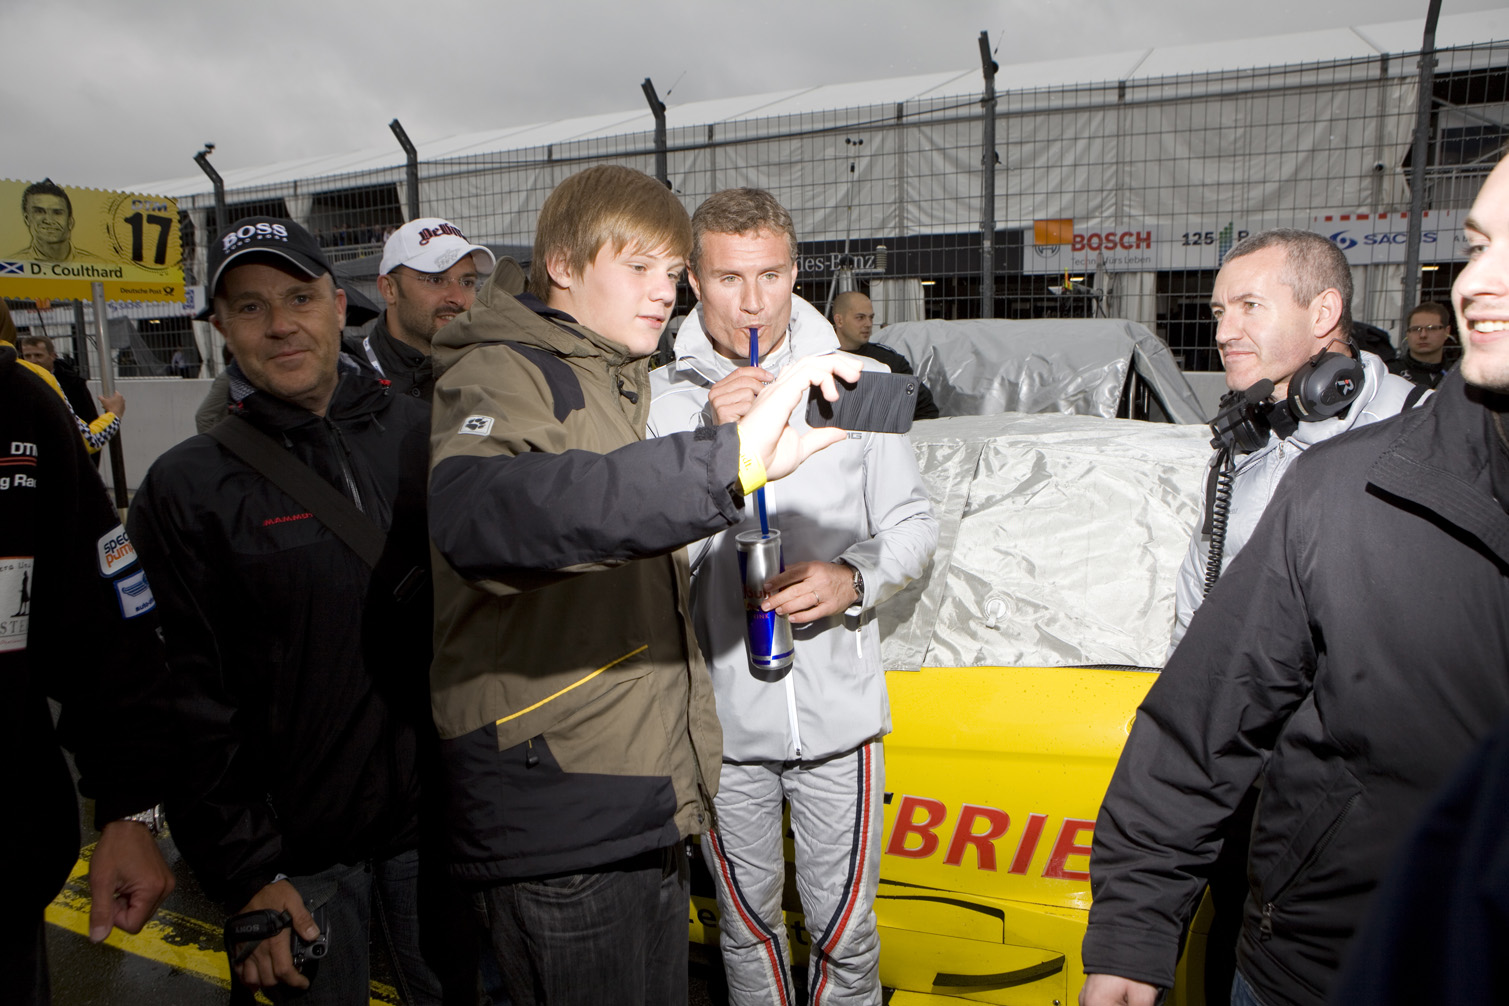 A fan photographs himself and David Coulthard